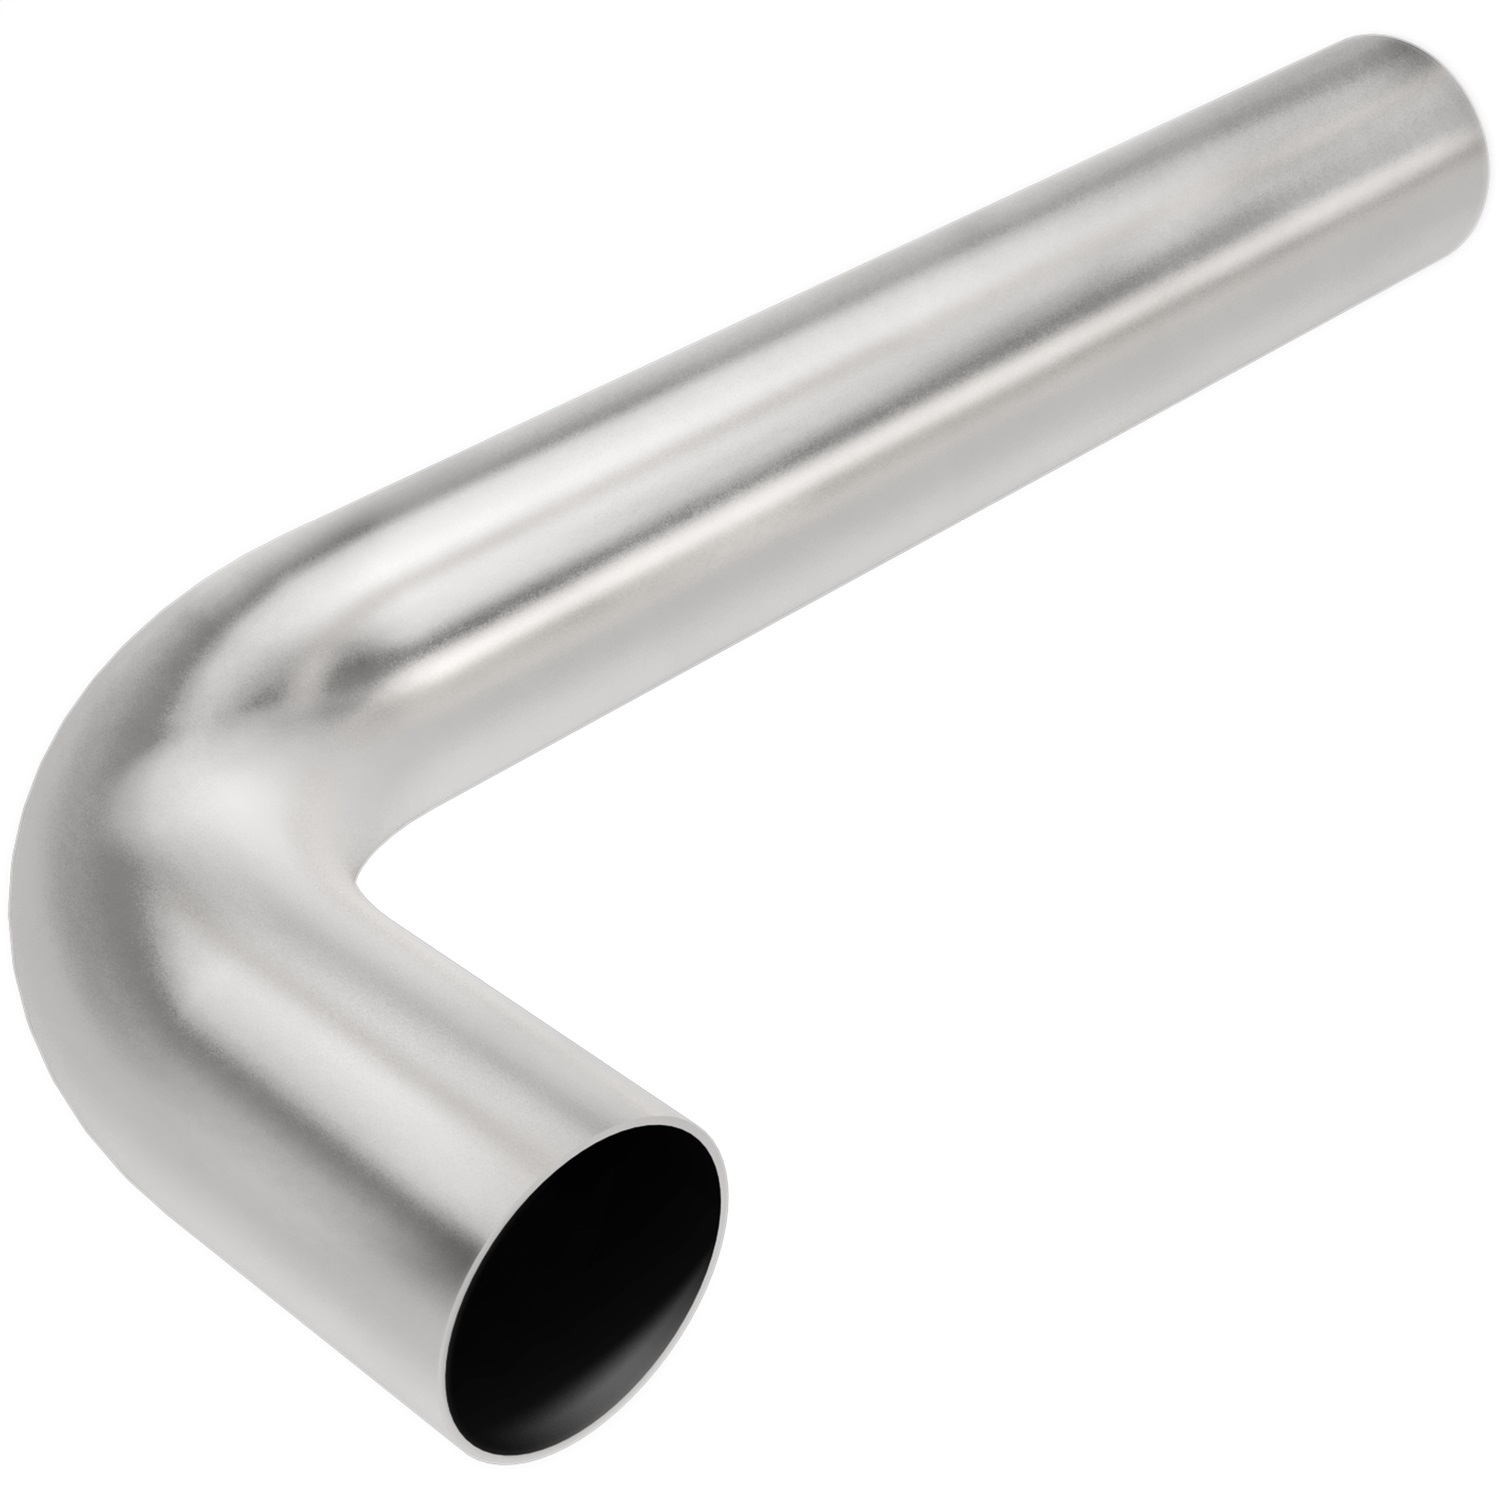 Magnaflow Performance Exhaust Magnaflow Performance Exhaust 10706 Smooth Transitions Exhaust Pipe